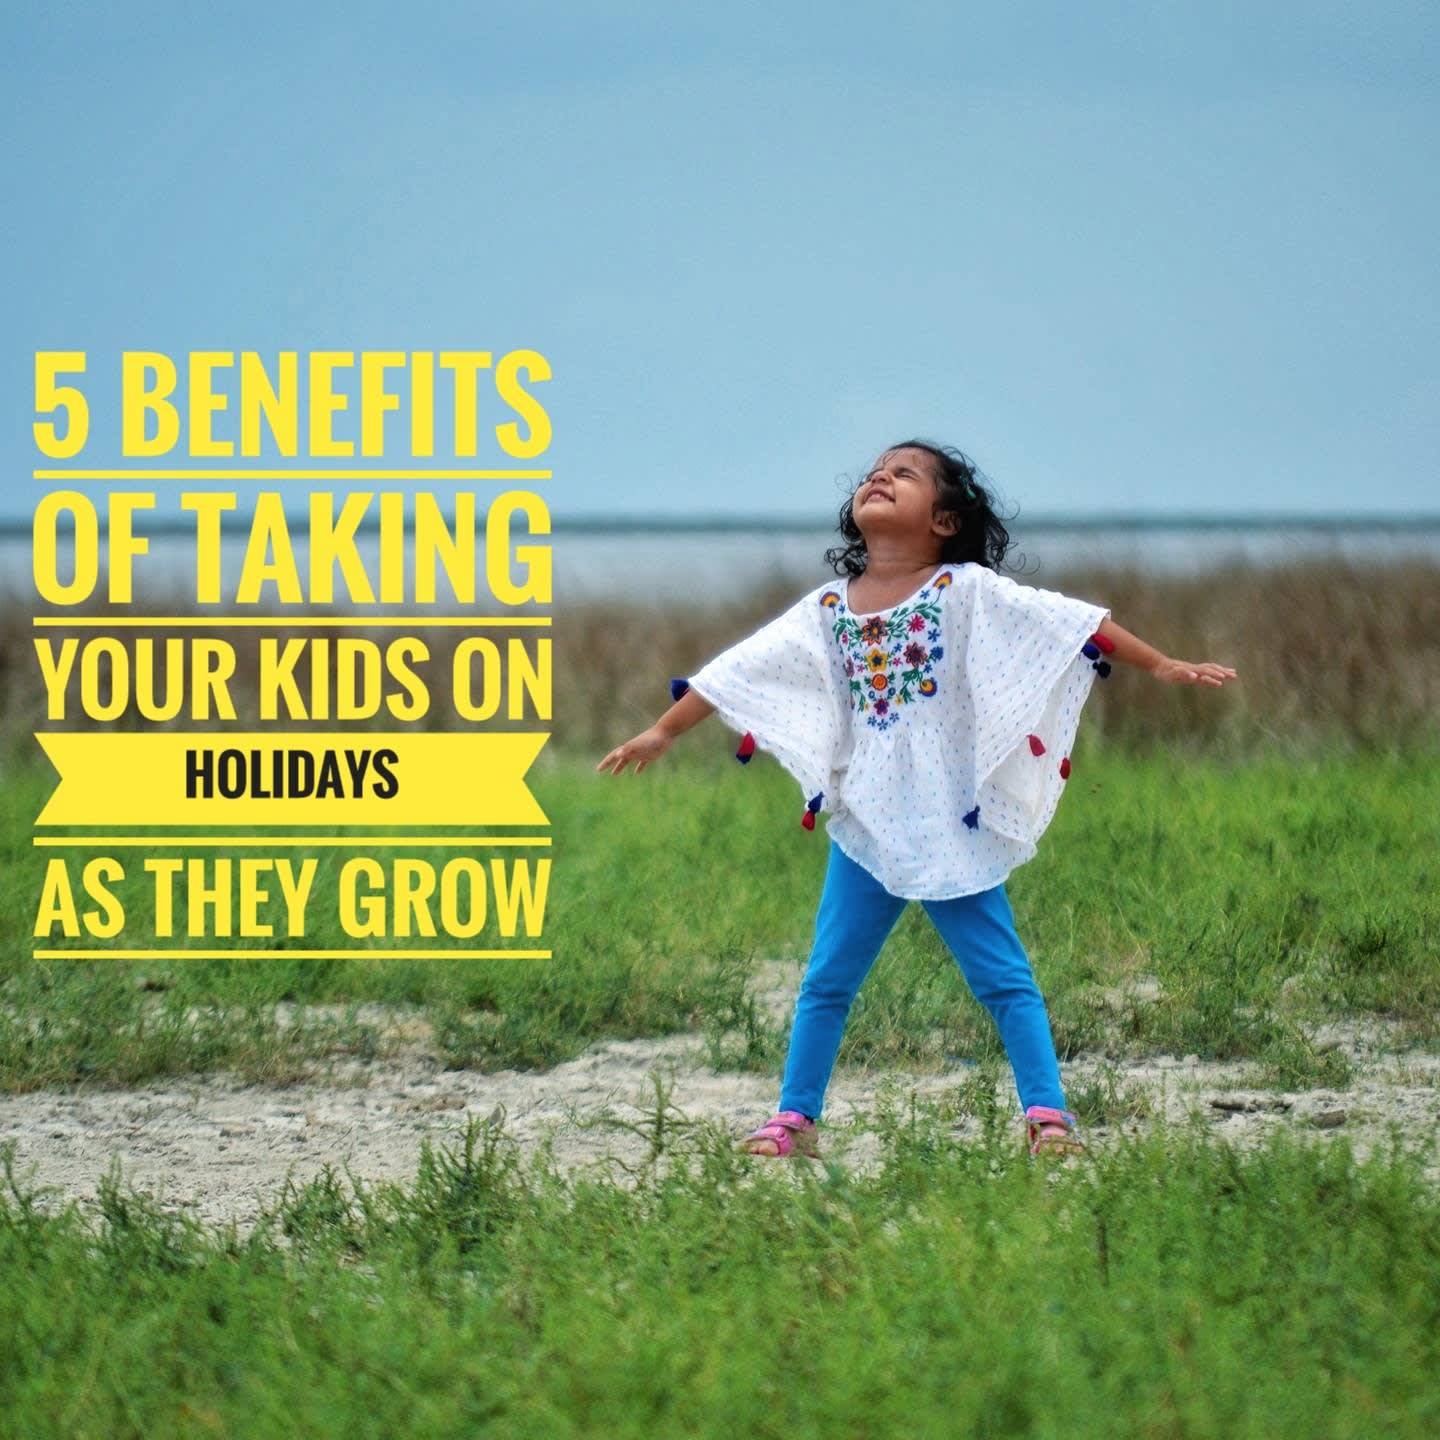 5 benefits of taking kids on holidays as they grow